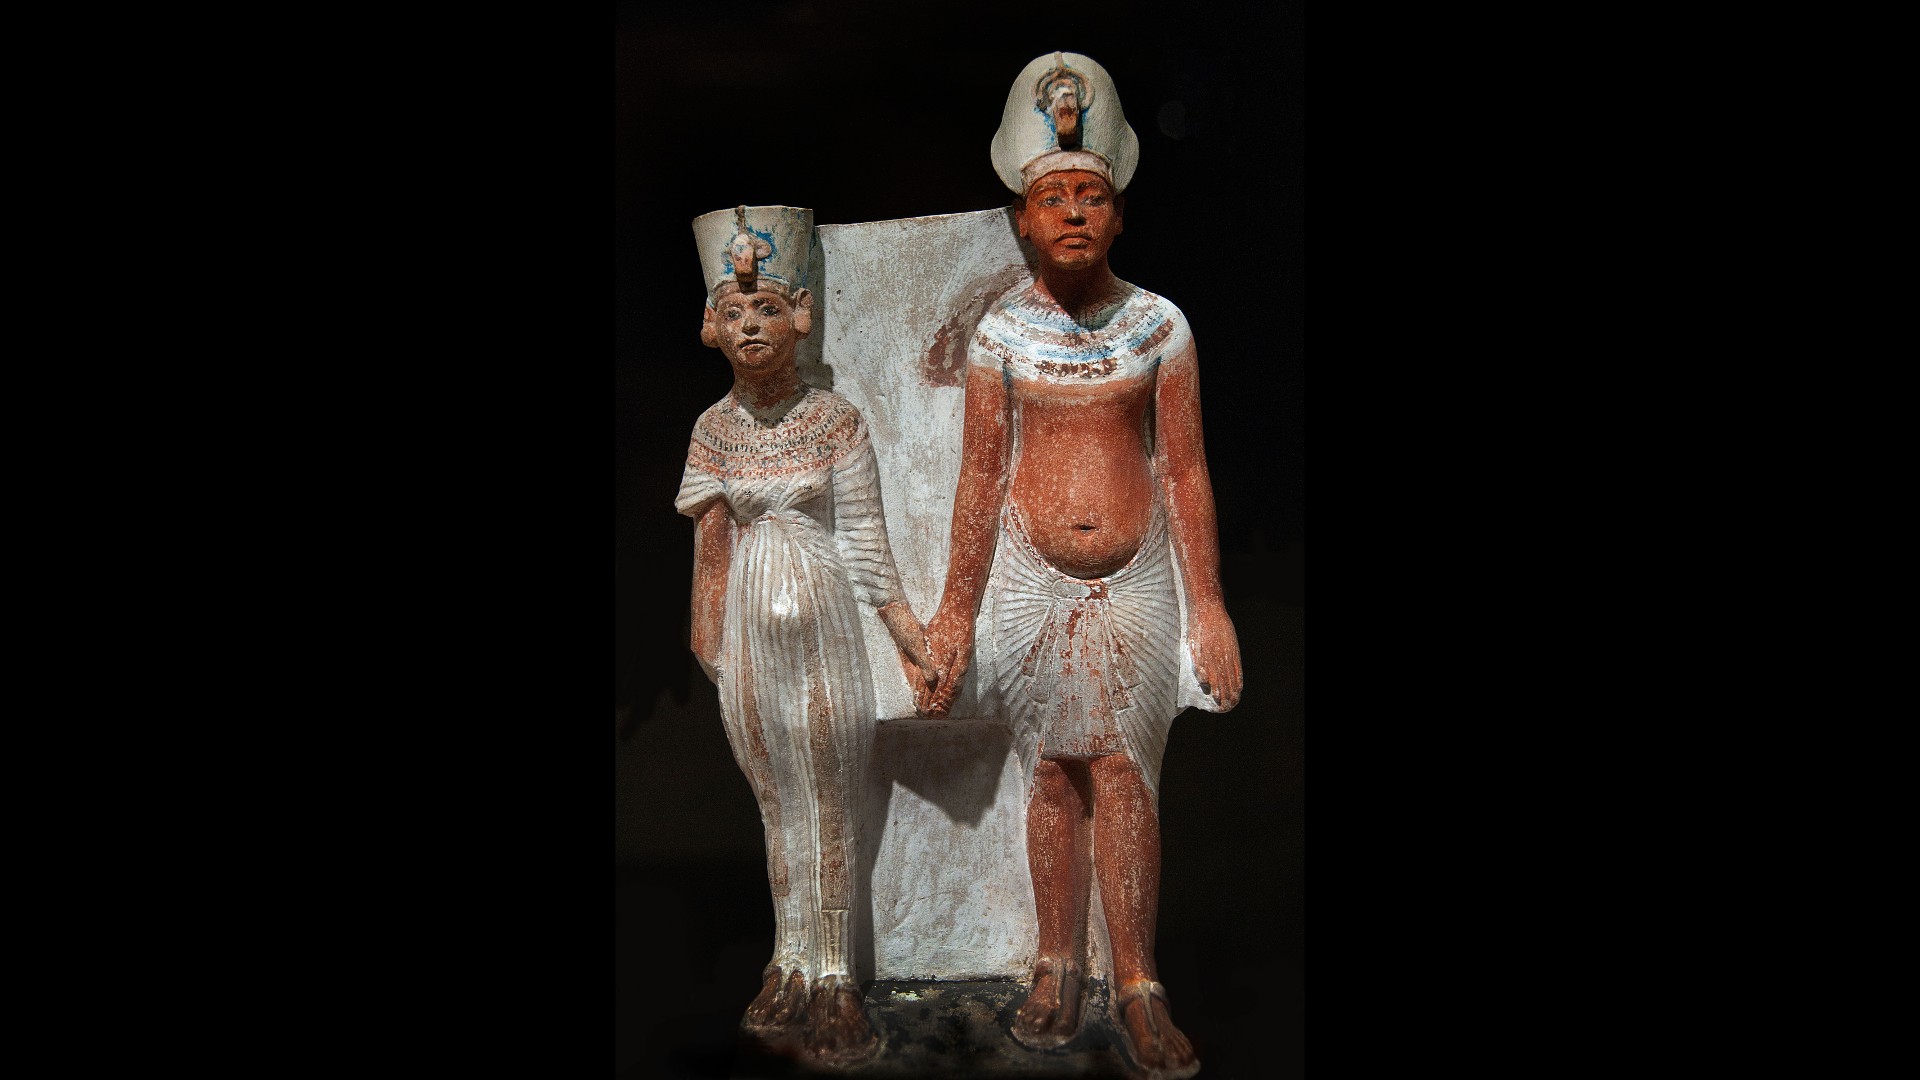 Statue of the royal family King Akhenaten and Queen Nefertiti holding hands, side by side (1345 B.C.).